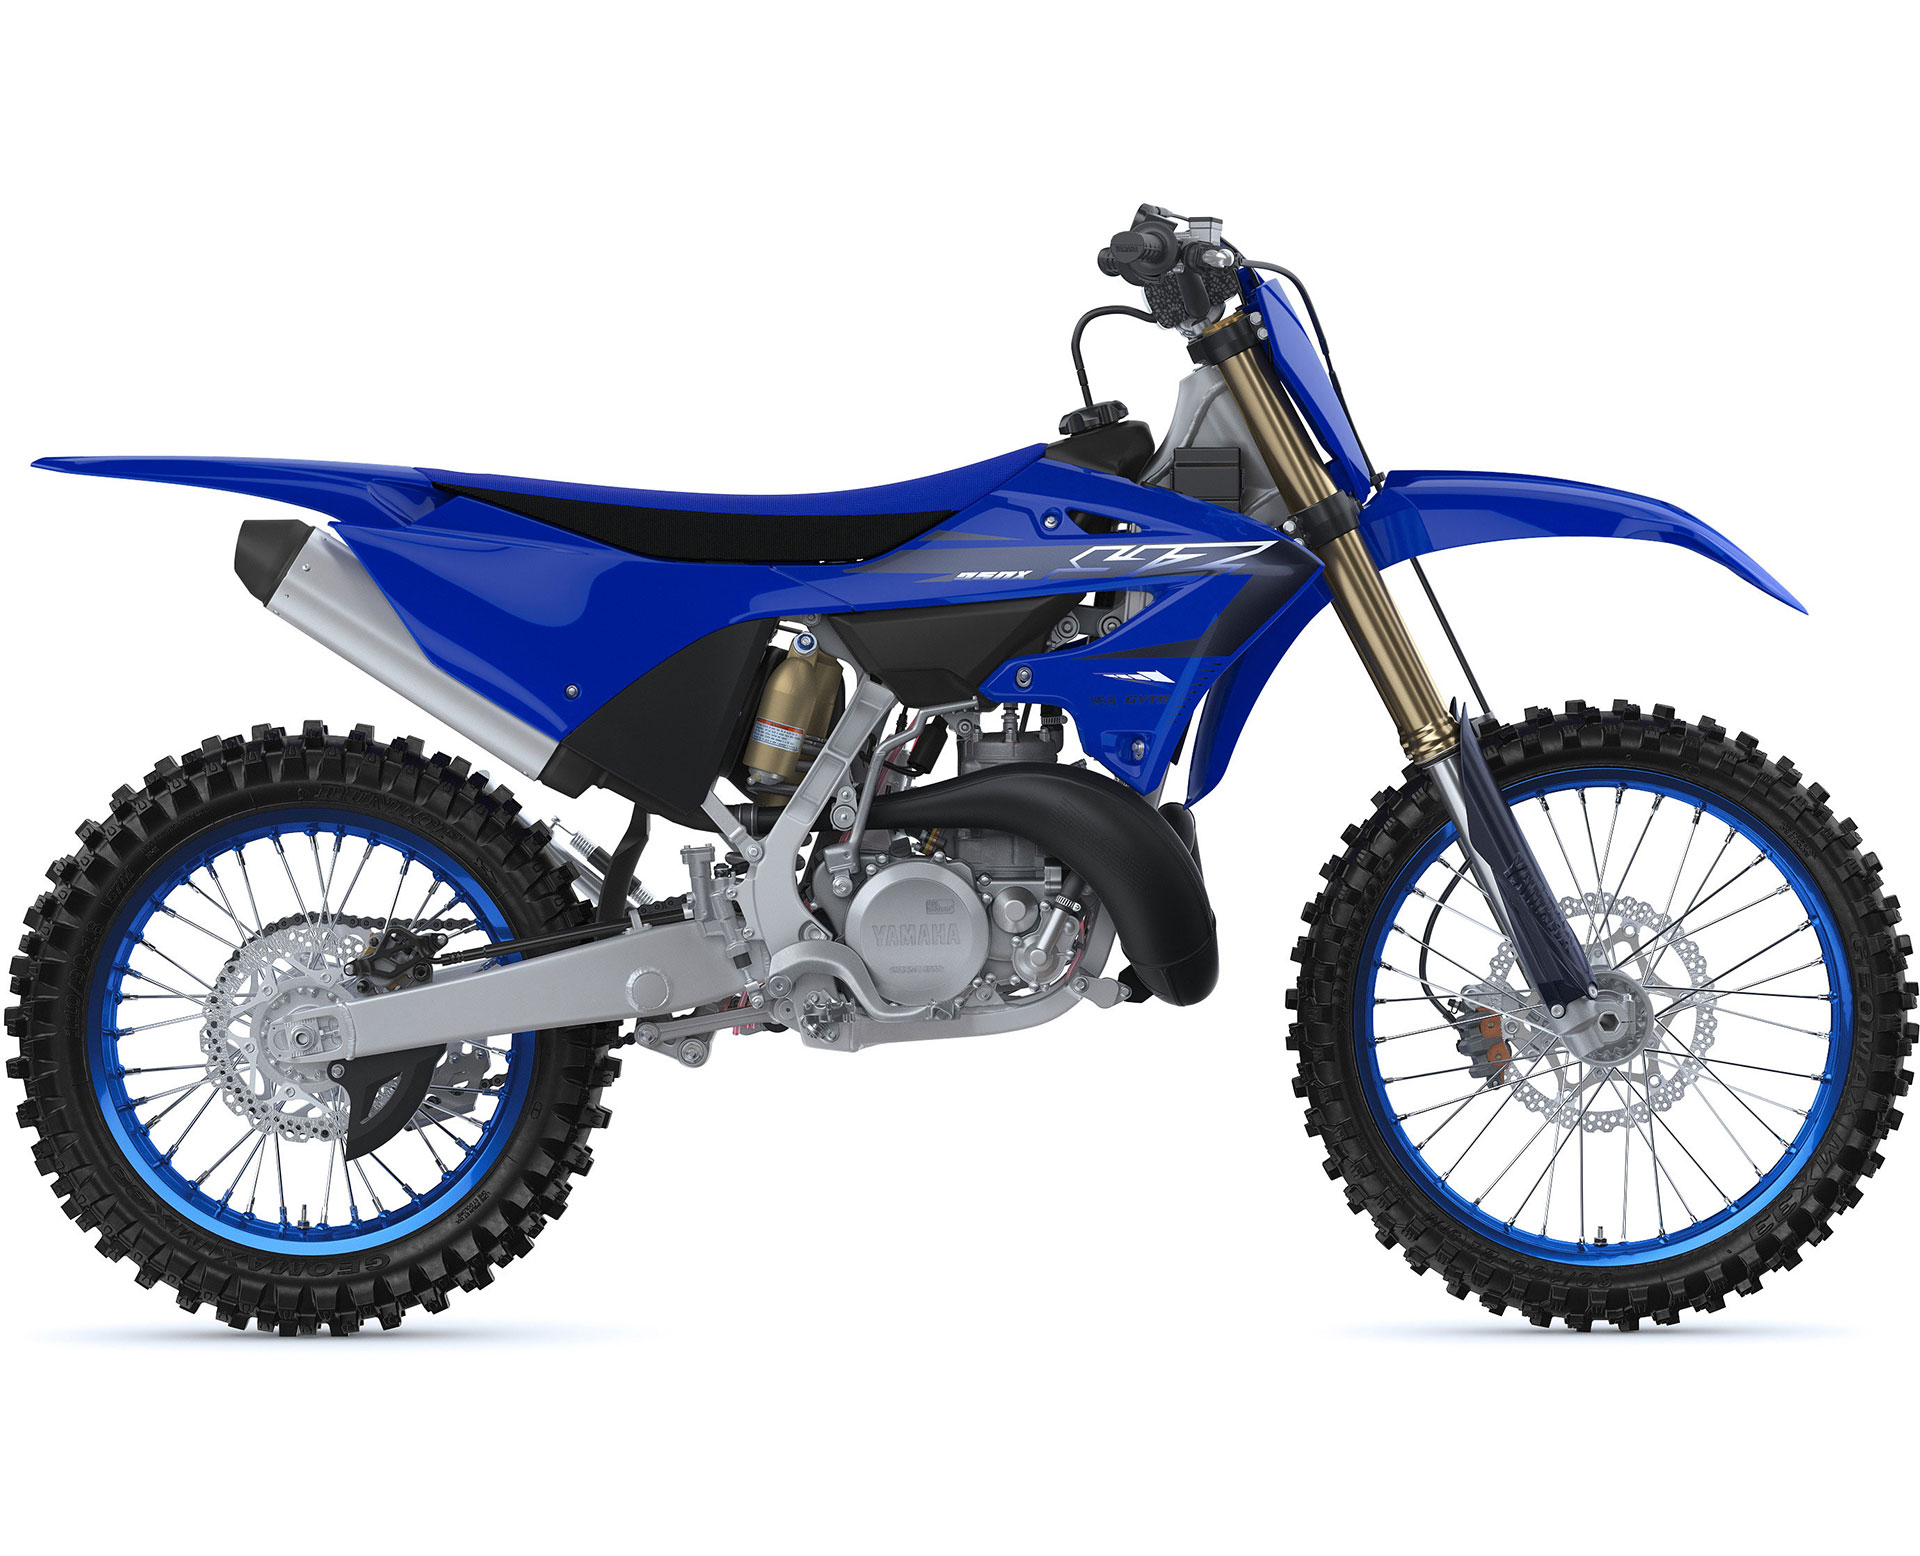 Thumbnail of your customized YZ250X 2023